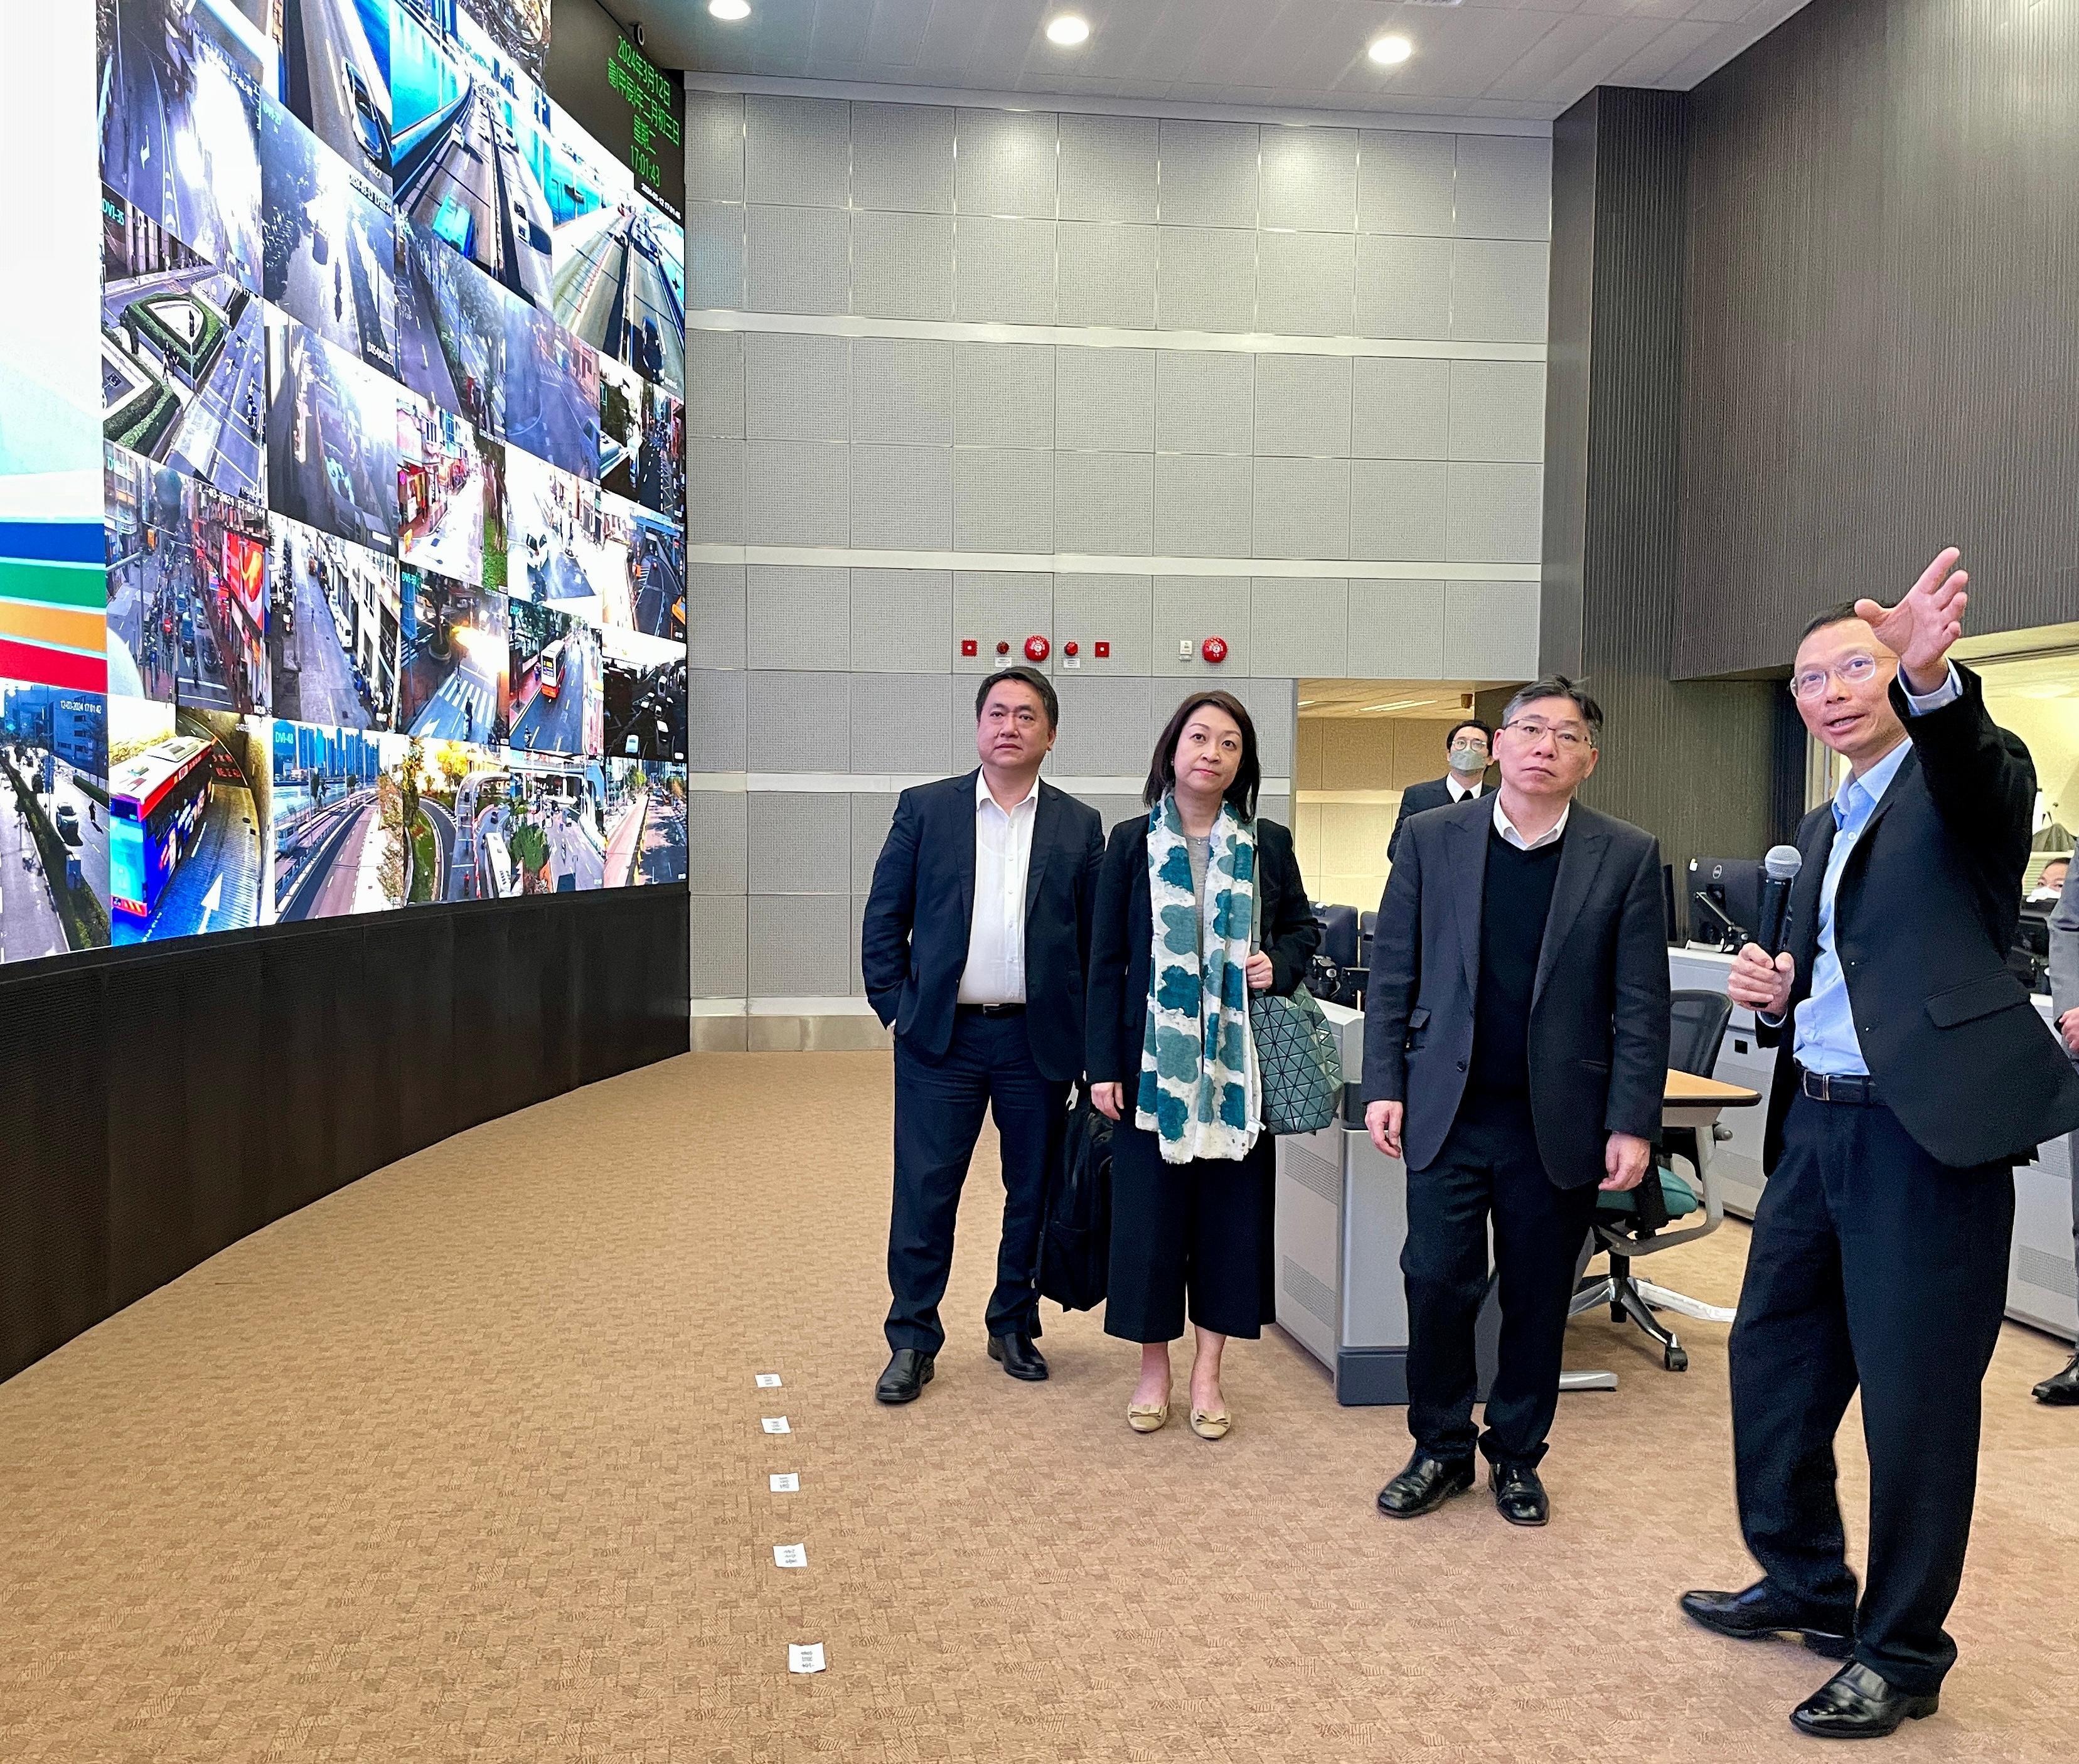 The Secretary for Transport and Logistics, Mr Lam Sai-hung, visited Zhuhai and Macao today (March 12). Photo shows Mr Lam (second right) visiting the Traffic Control and Information Center of the Macao Transport Bureau, and being briefed by the Director of the Macao Transport Bureau, Mr Lam Hin-san (first right), on the management of local transport. Also present is the Commissioner for Transport, Ms Angela Lee (second left).